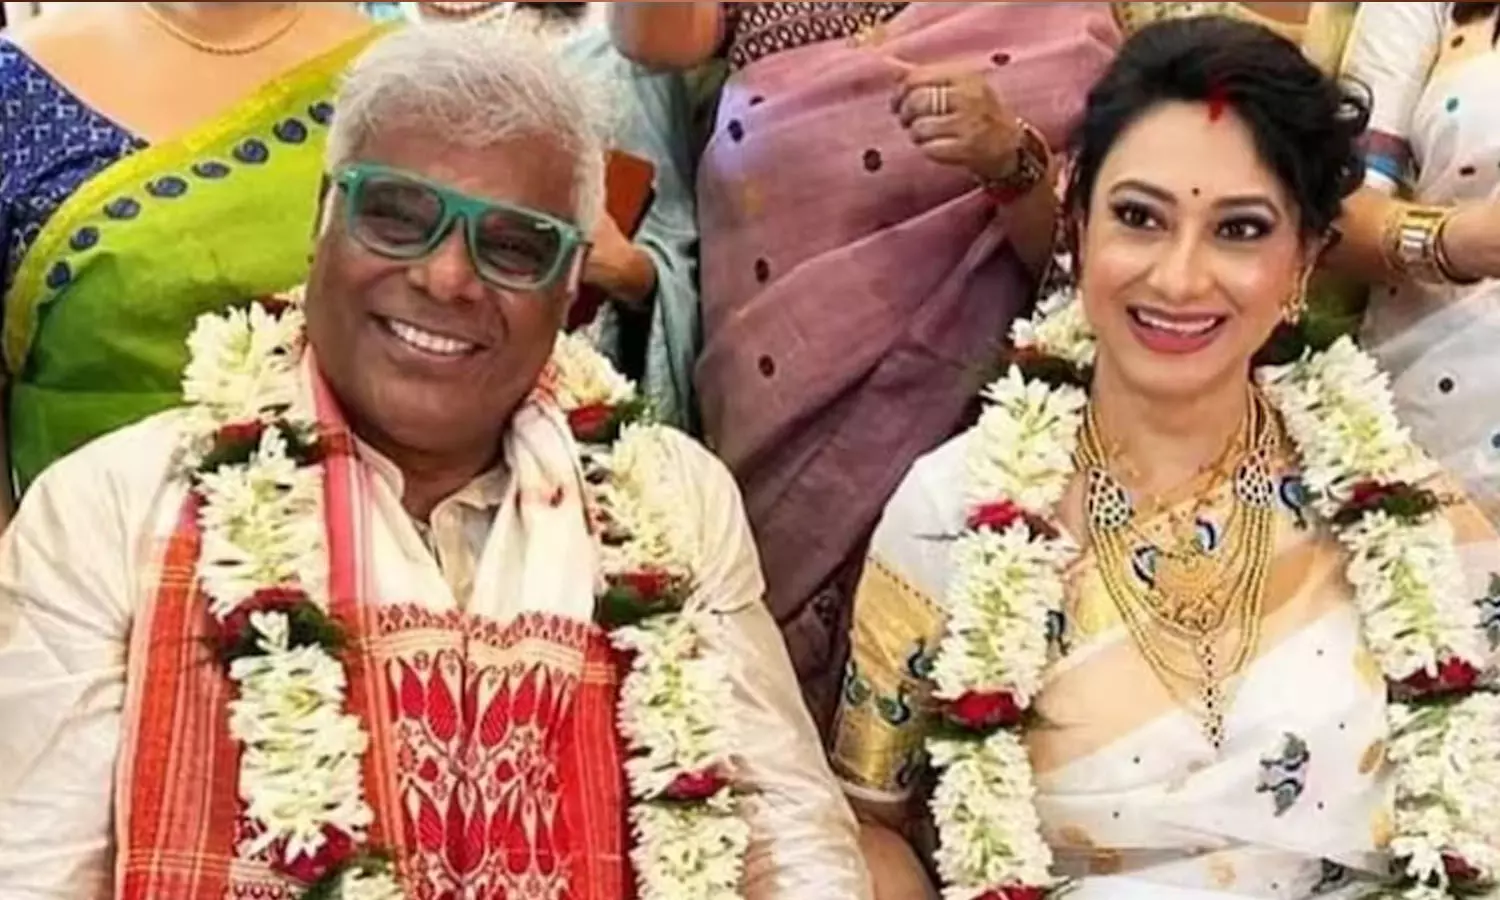 Acclaimed actor Ashish Vidyarthi ties the knot at the age of 60